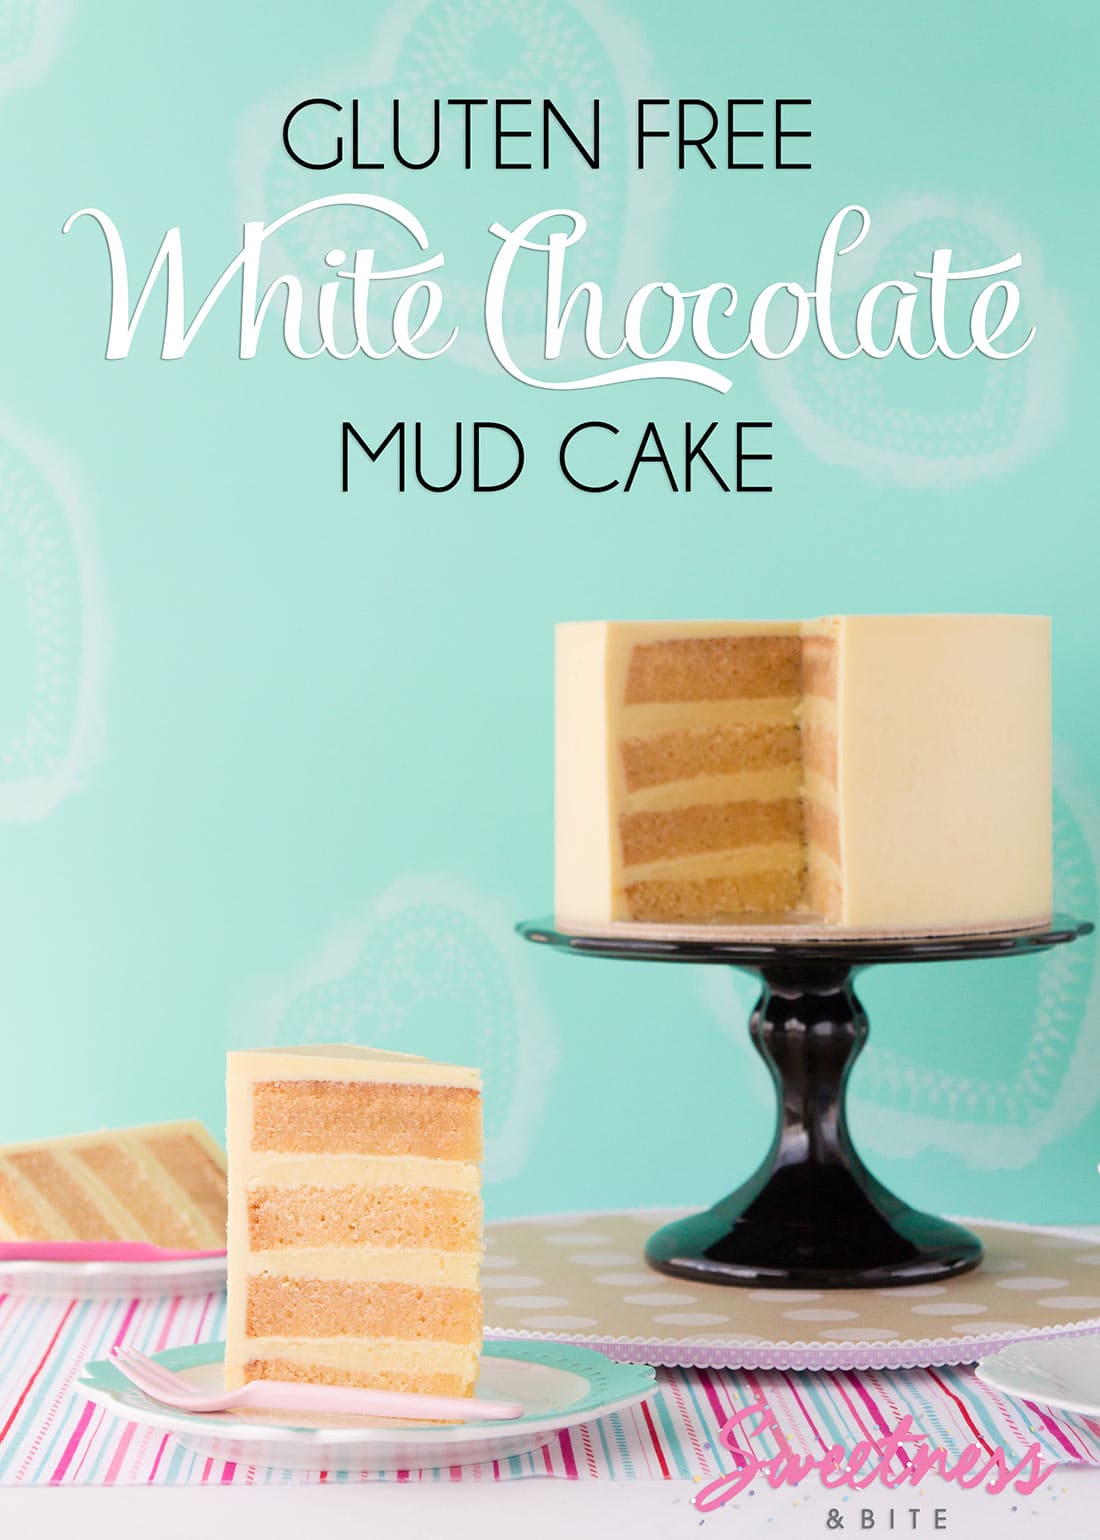 A moist, dense gluten free white chocolate mud cake. Perfect for cake decorating, it keeps well, can be covered in fondant and used for tiered cakes.